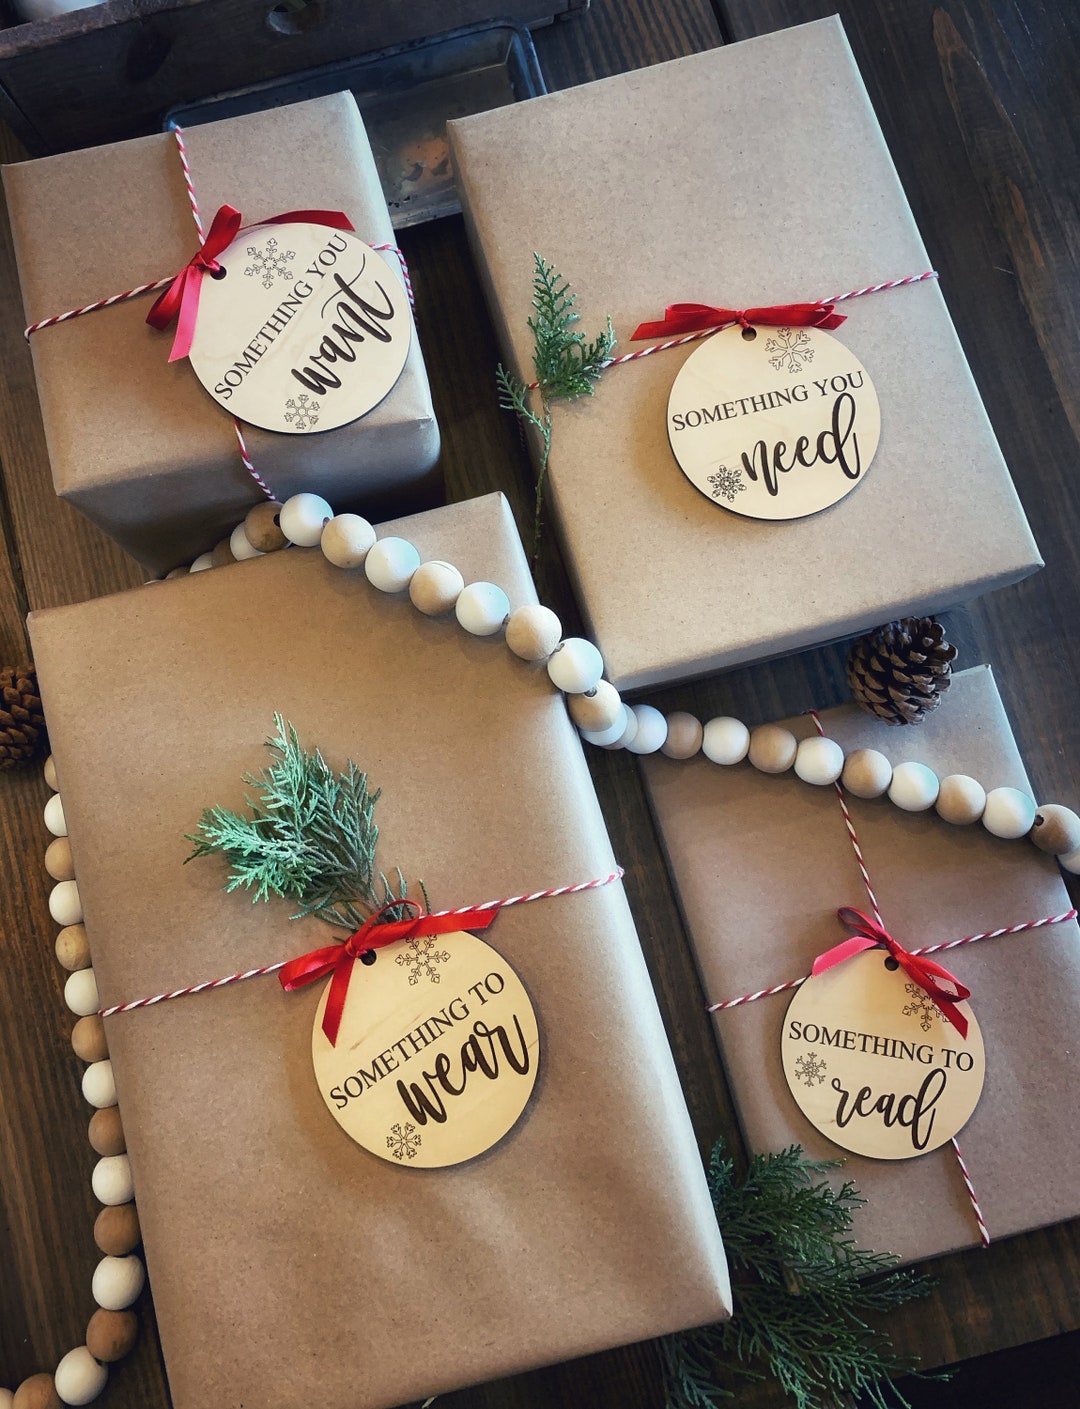 5 Christmas Gifts You Didn't Know You Could Customize